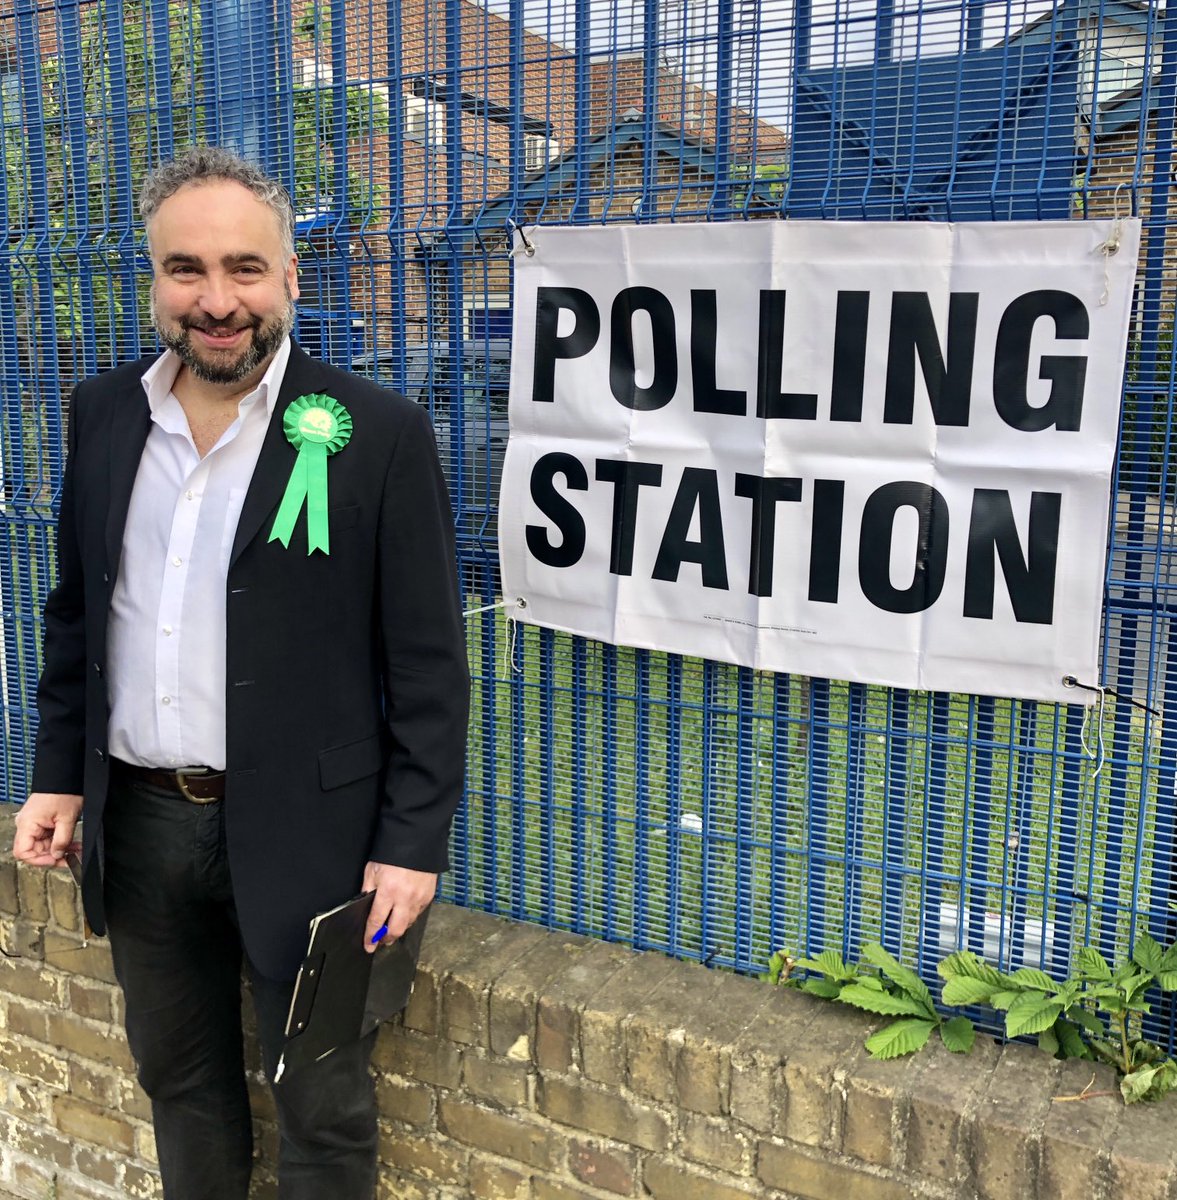 Good luck to all my ⁦@TheGreenParty⁩ friends and colleagues standing for election today across the whole of the country. #GetGreensElected for fairer, greener communities